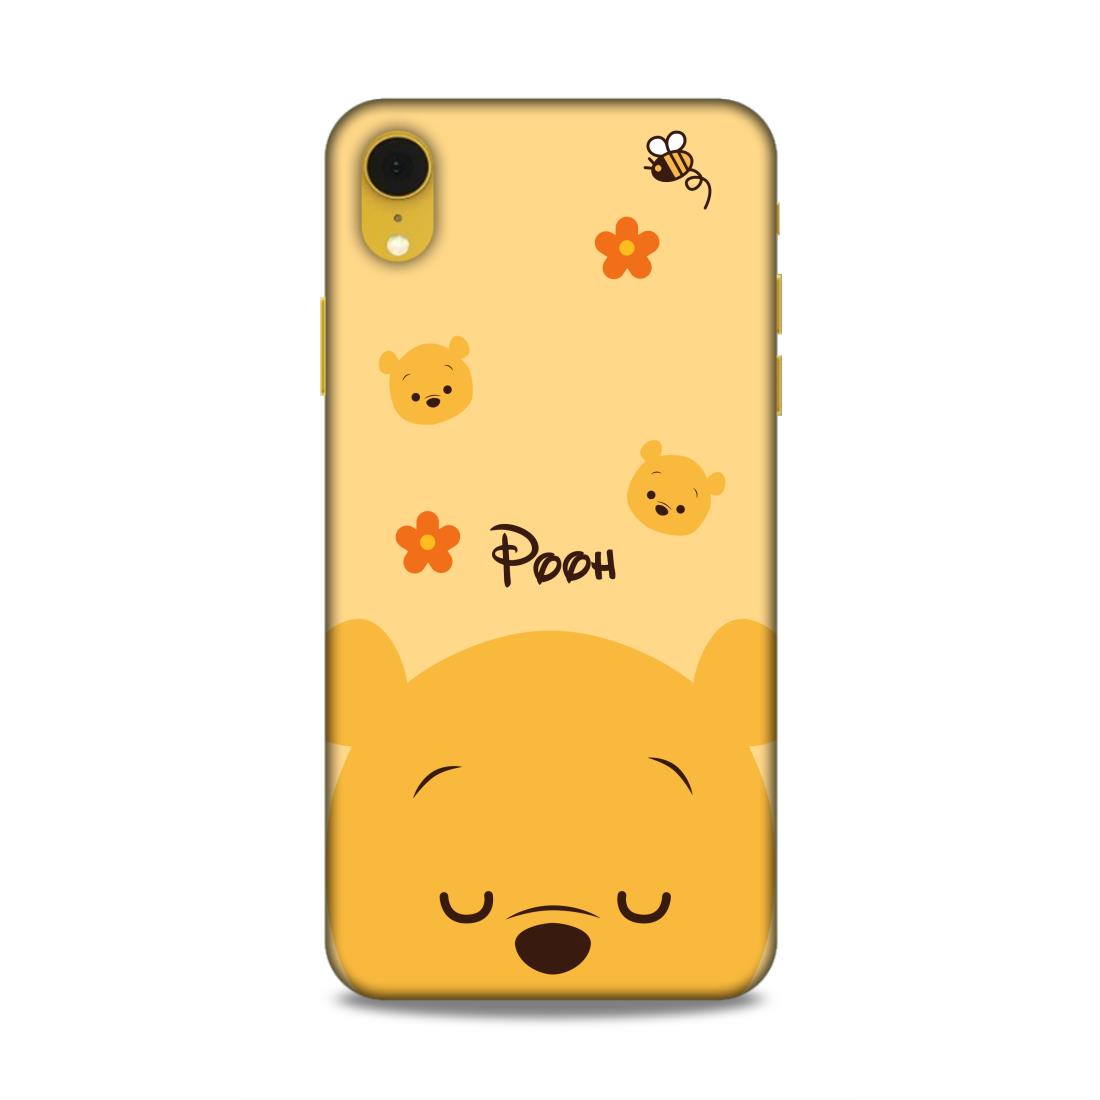 Pooh Cartton Hard Back Case For Apple iPhone XR